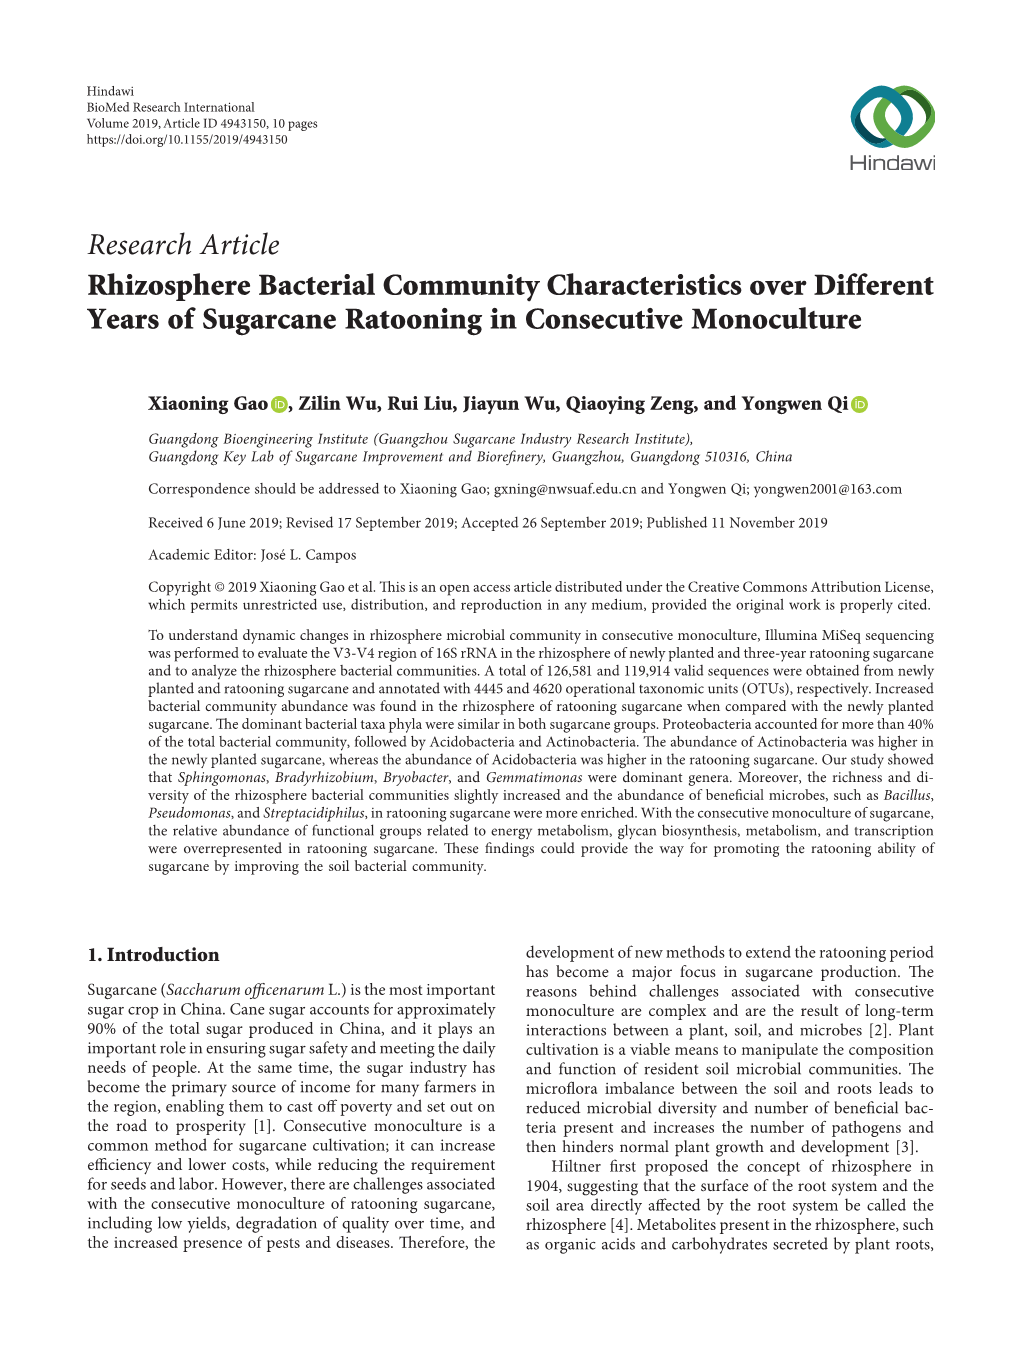 Rhizosphere Bacterial Community Characteristics Over Different Years of Sugarcane Ratooning in Consecutive Monoculture